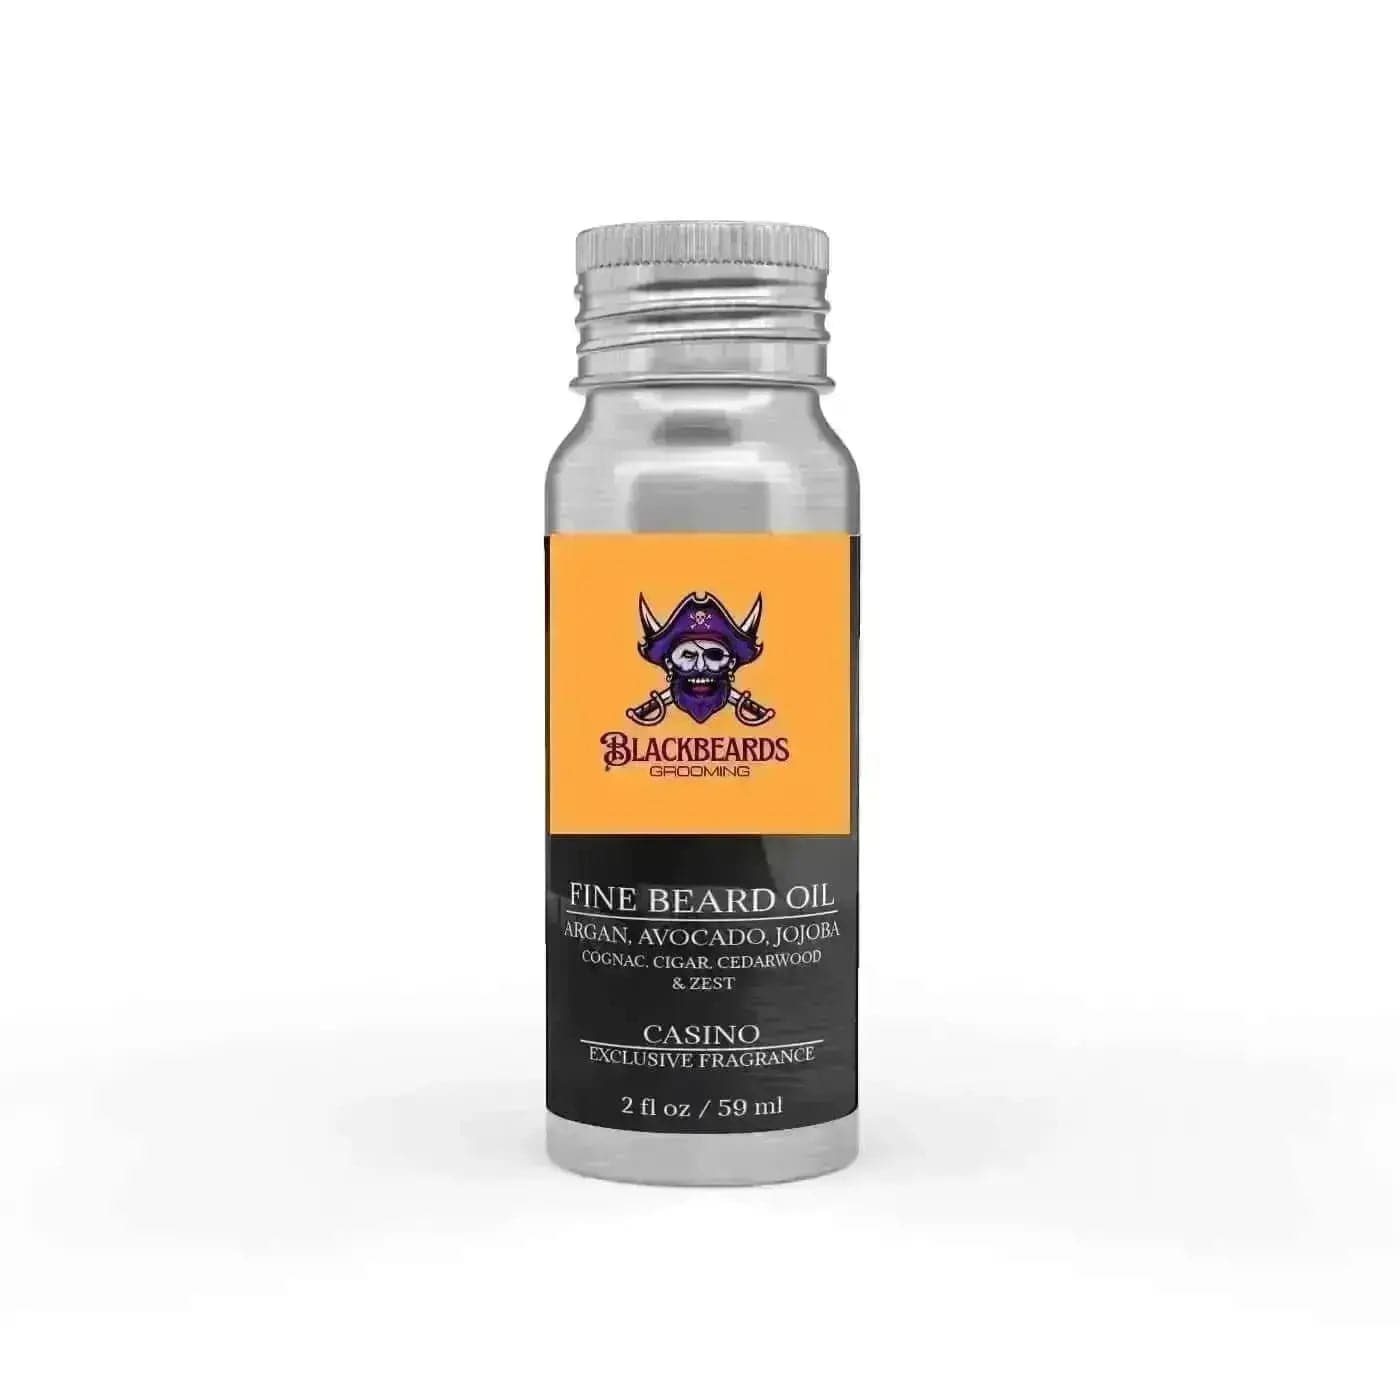 a bottle of beard oil on a white background